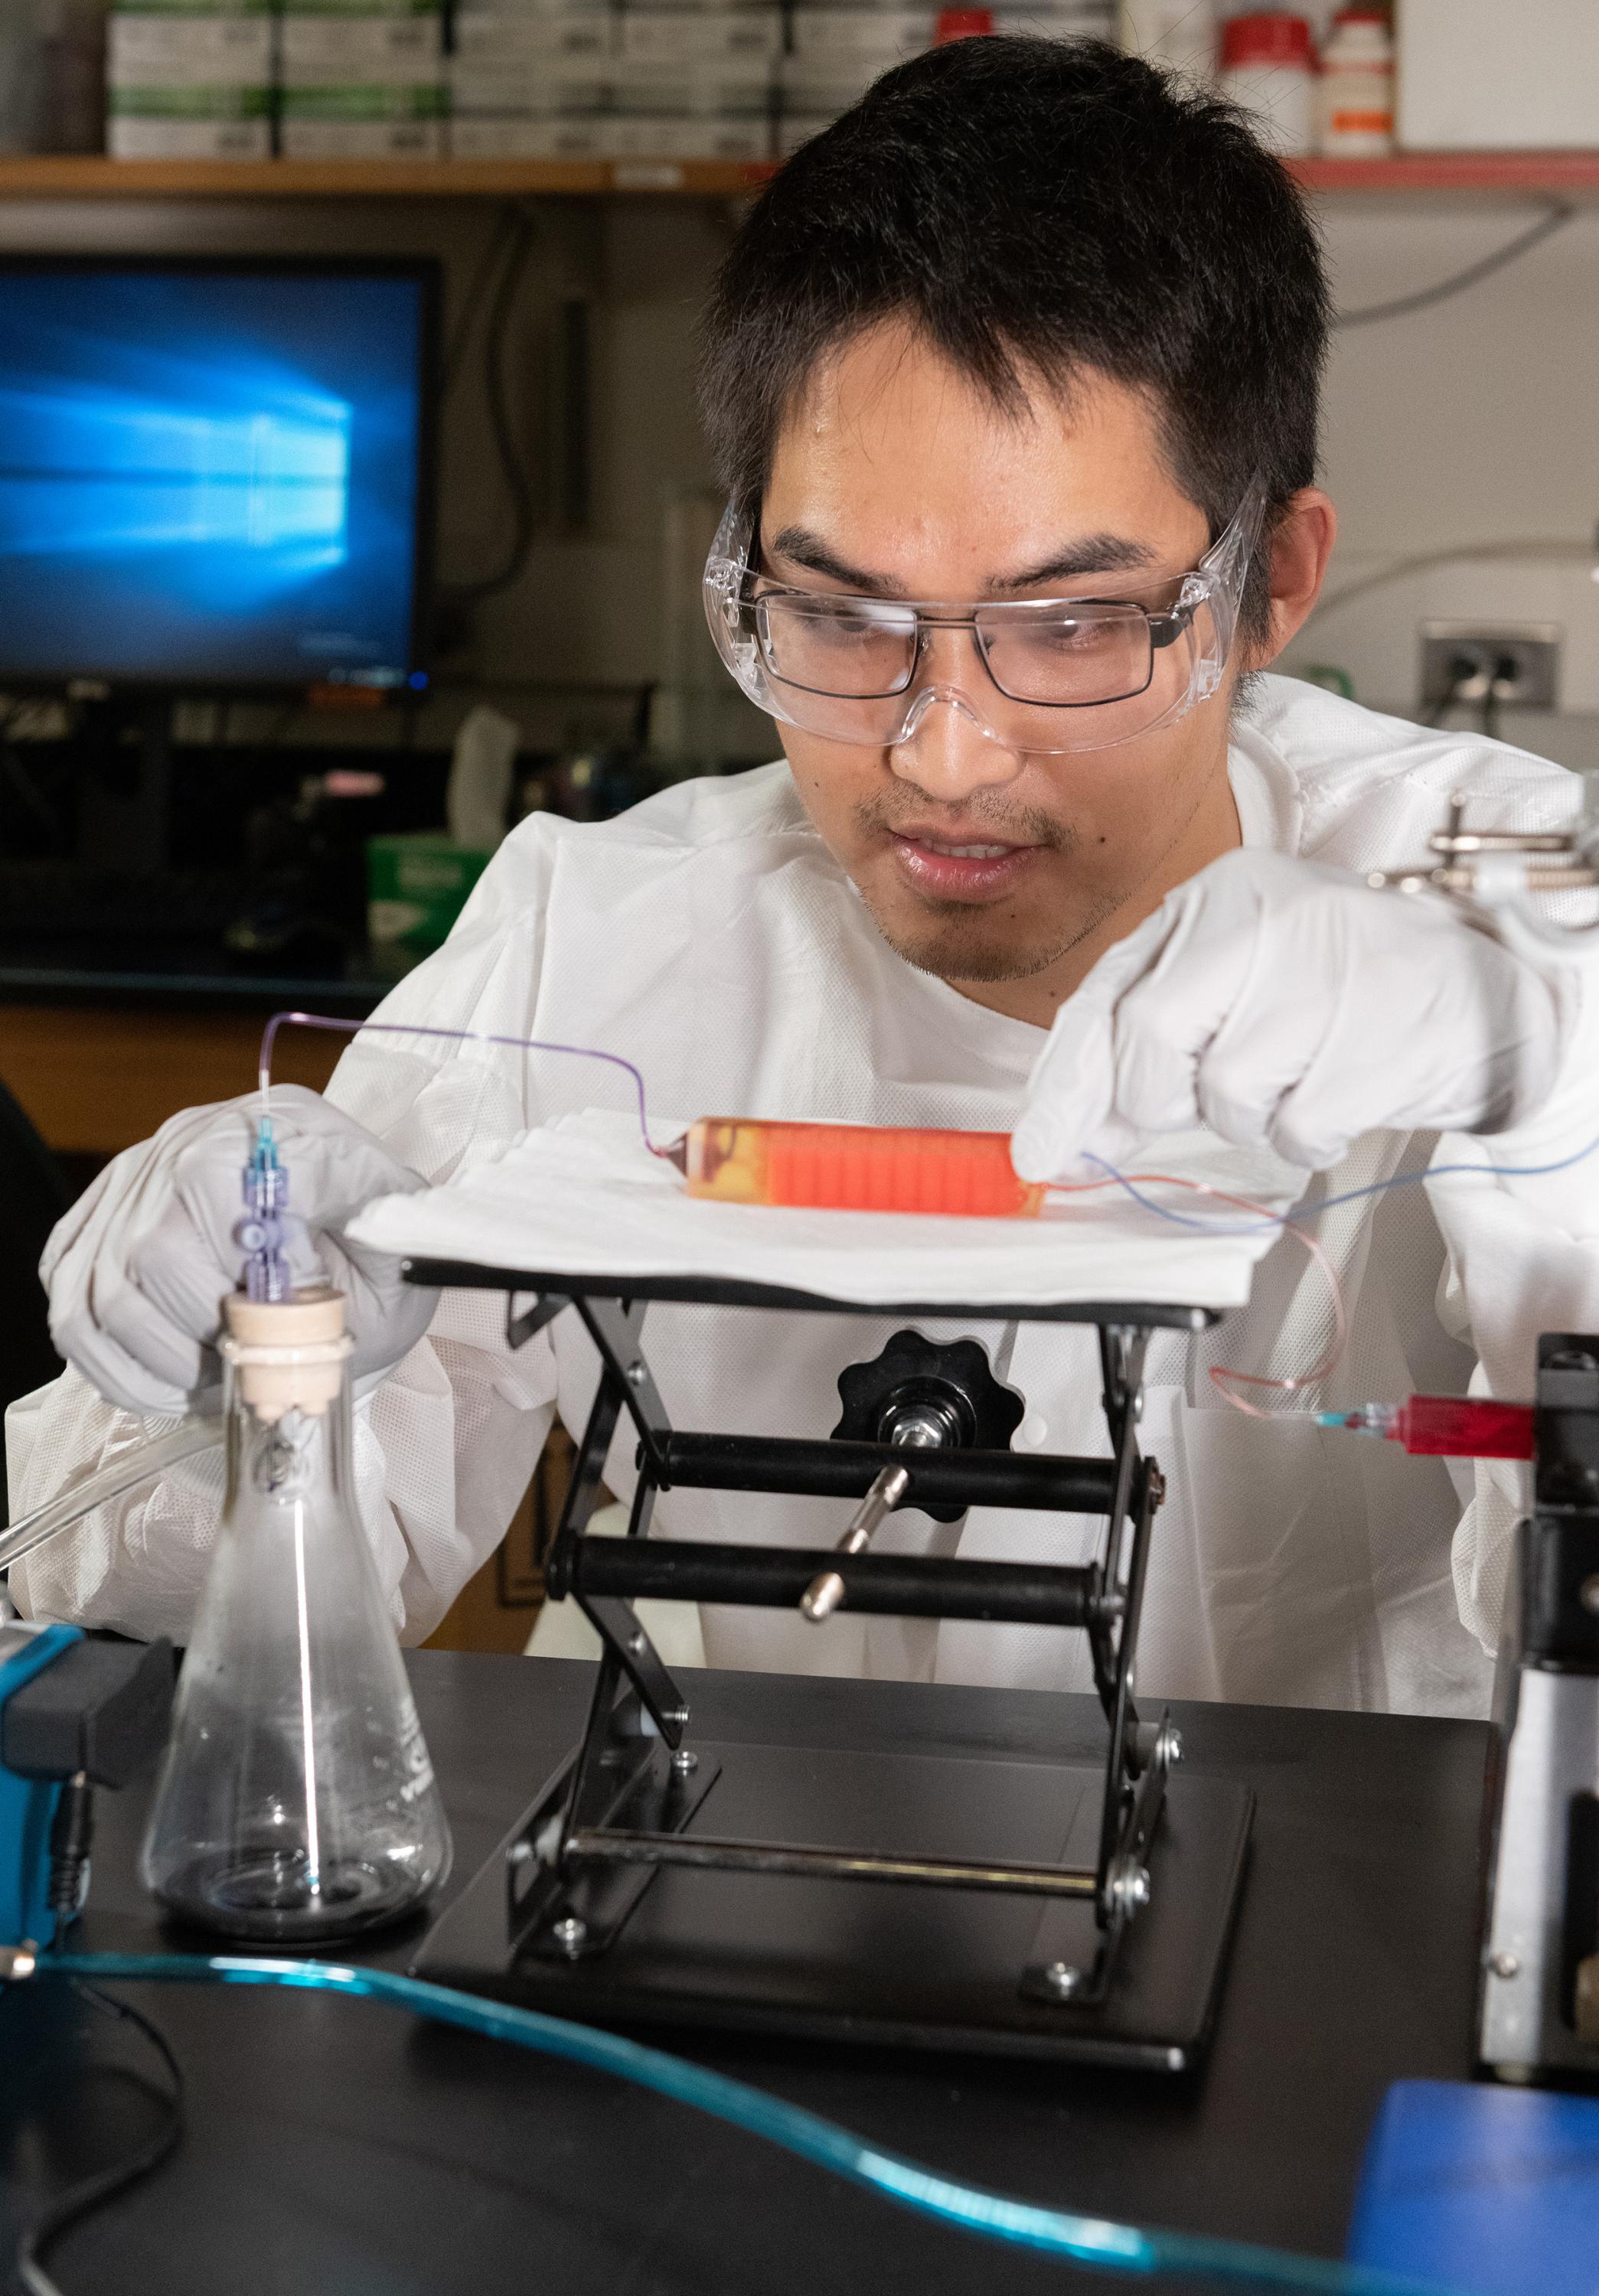 Graduate Student Chia-Heng Chu adjusts a 3D-printed cell trap in the laboratory of Assistant Professor A. Fatih Sarioglu at Georgia Tech. The trap captures white blood cells to isolate tumor cells from a blood sample. (Photo: Allison Carter, Georgia Tech)